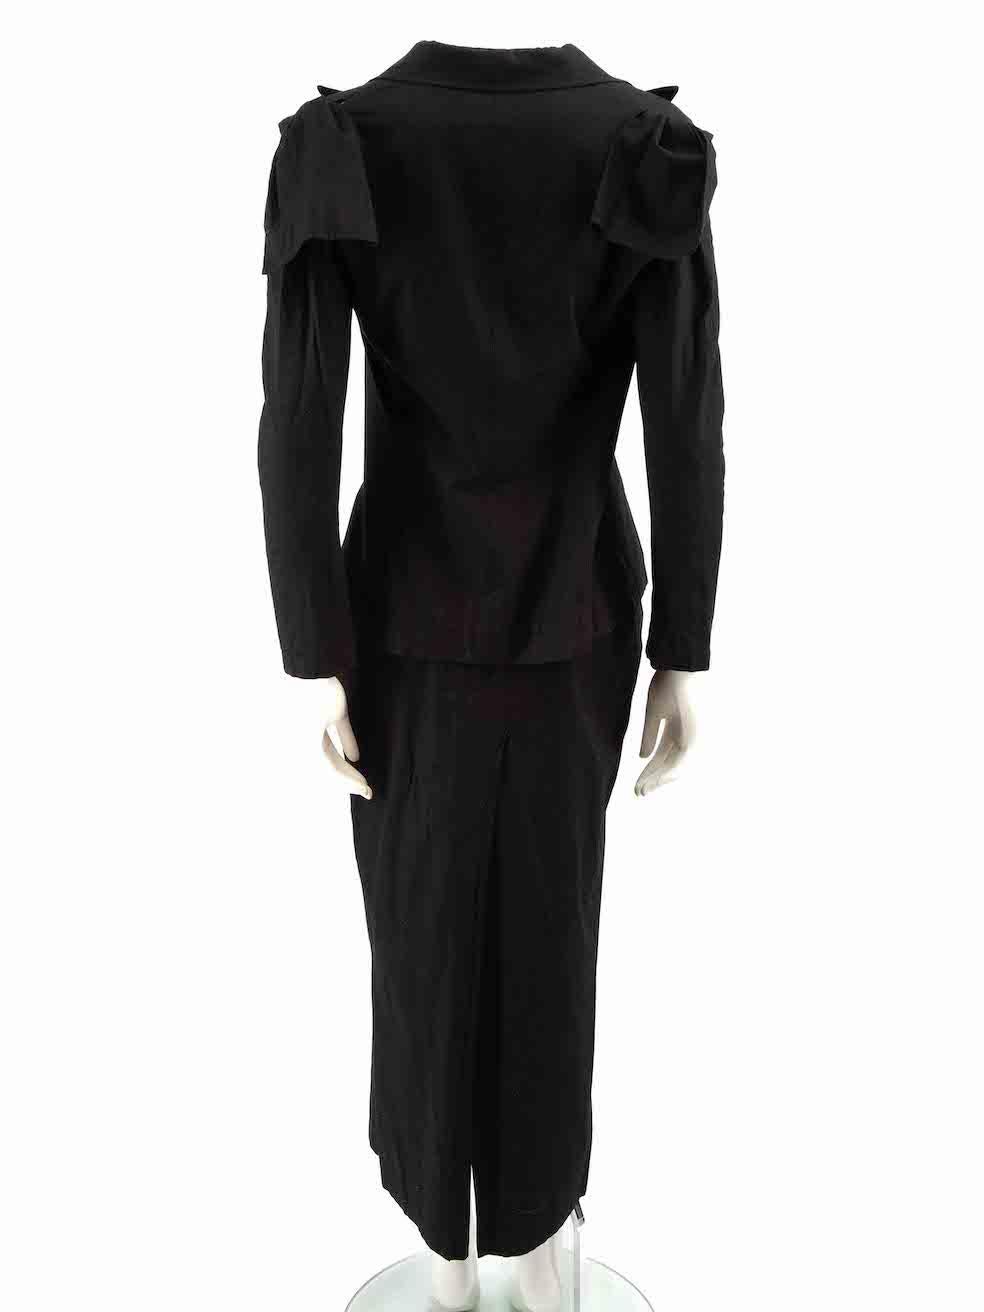 Yohji Yamamoto Black Deconstructed Blazer Skirt Set Size S In Good Condition For Sale In London, GB